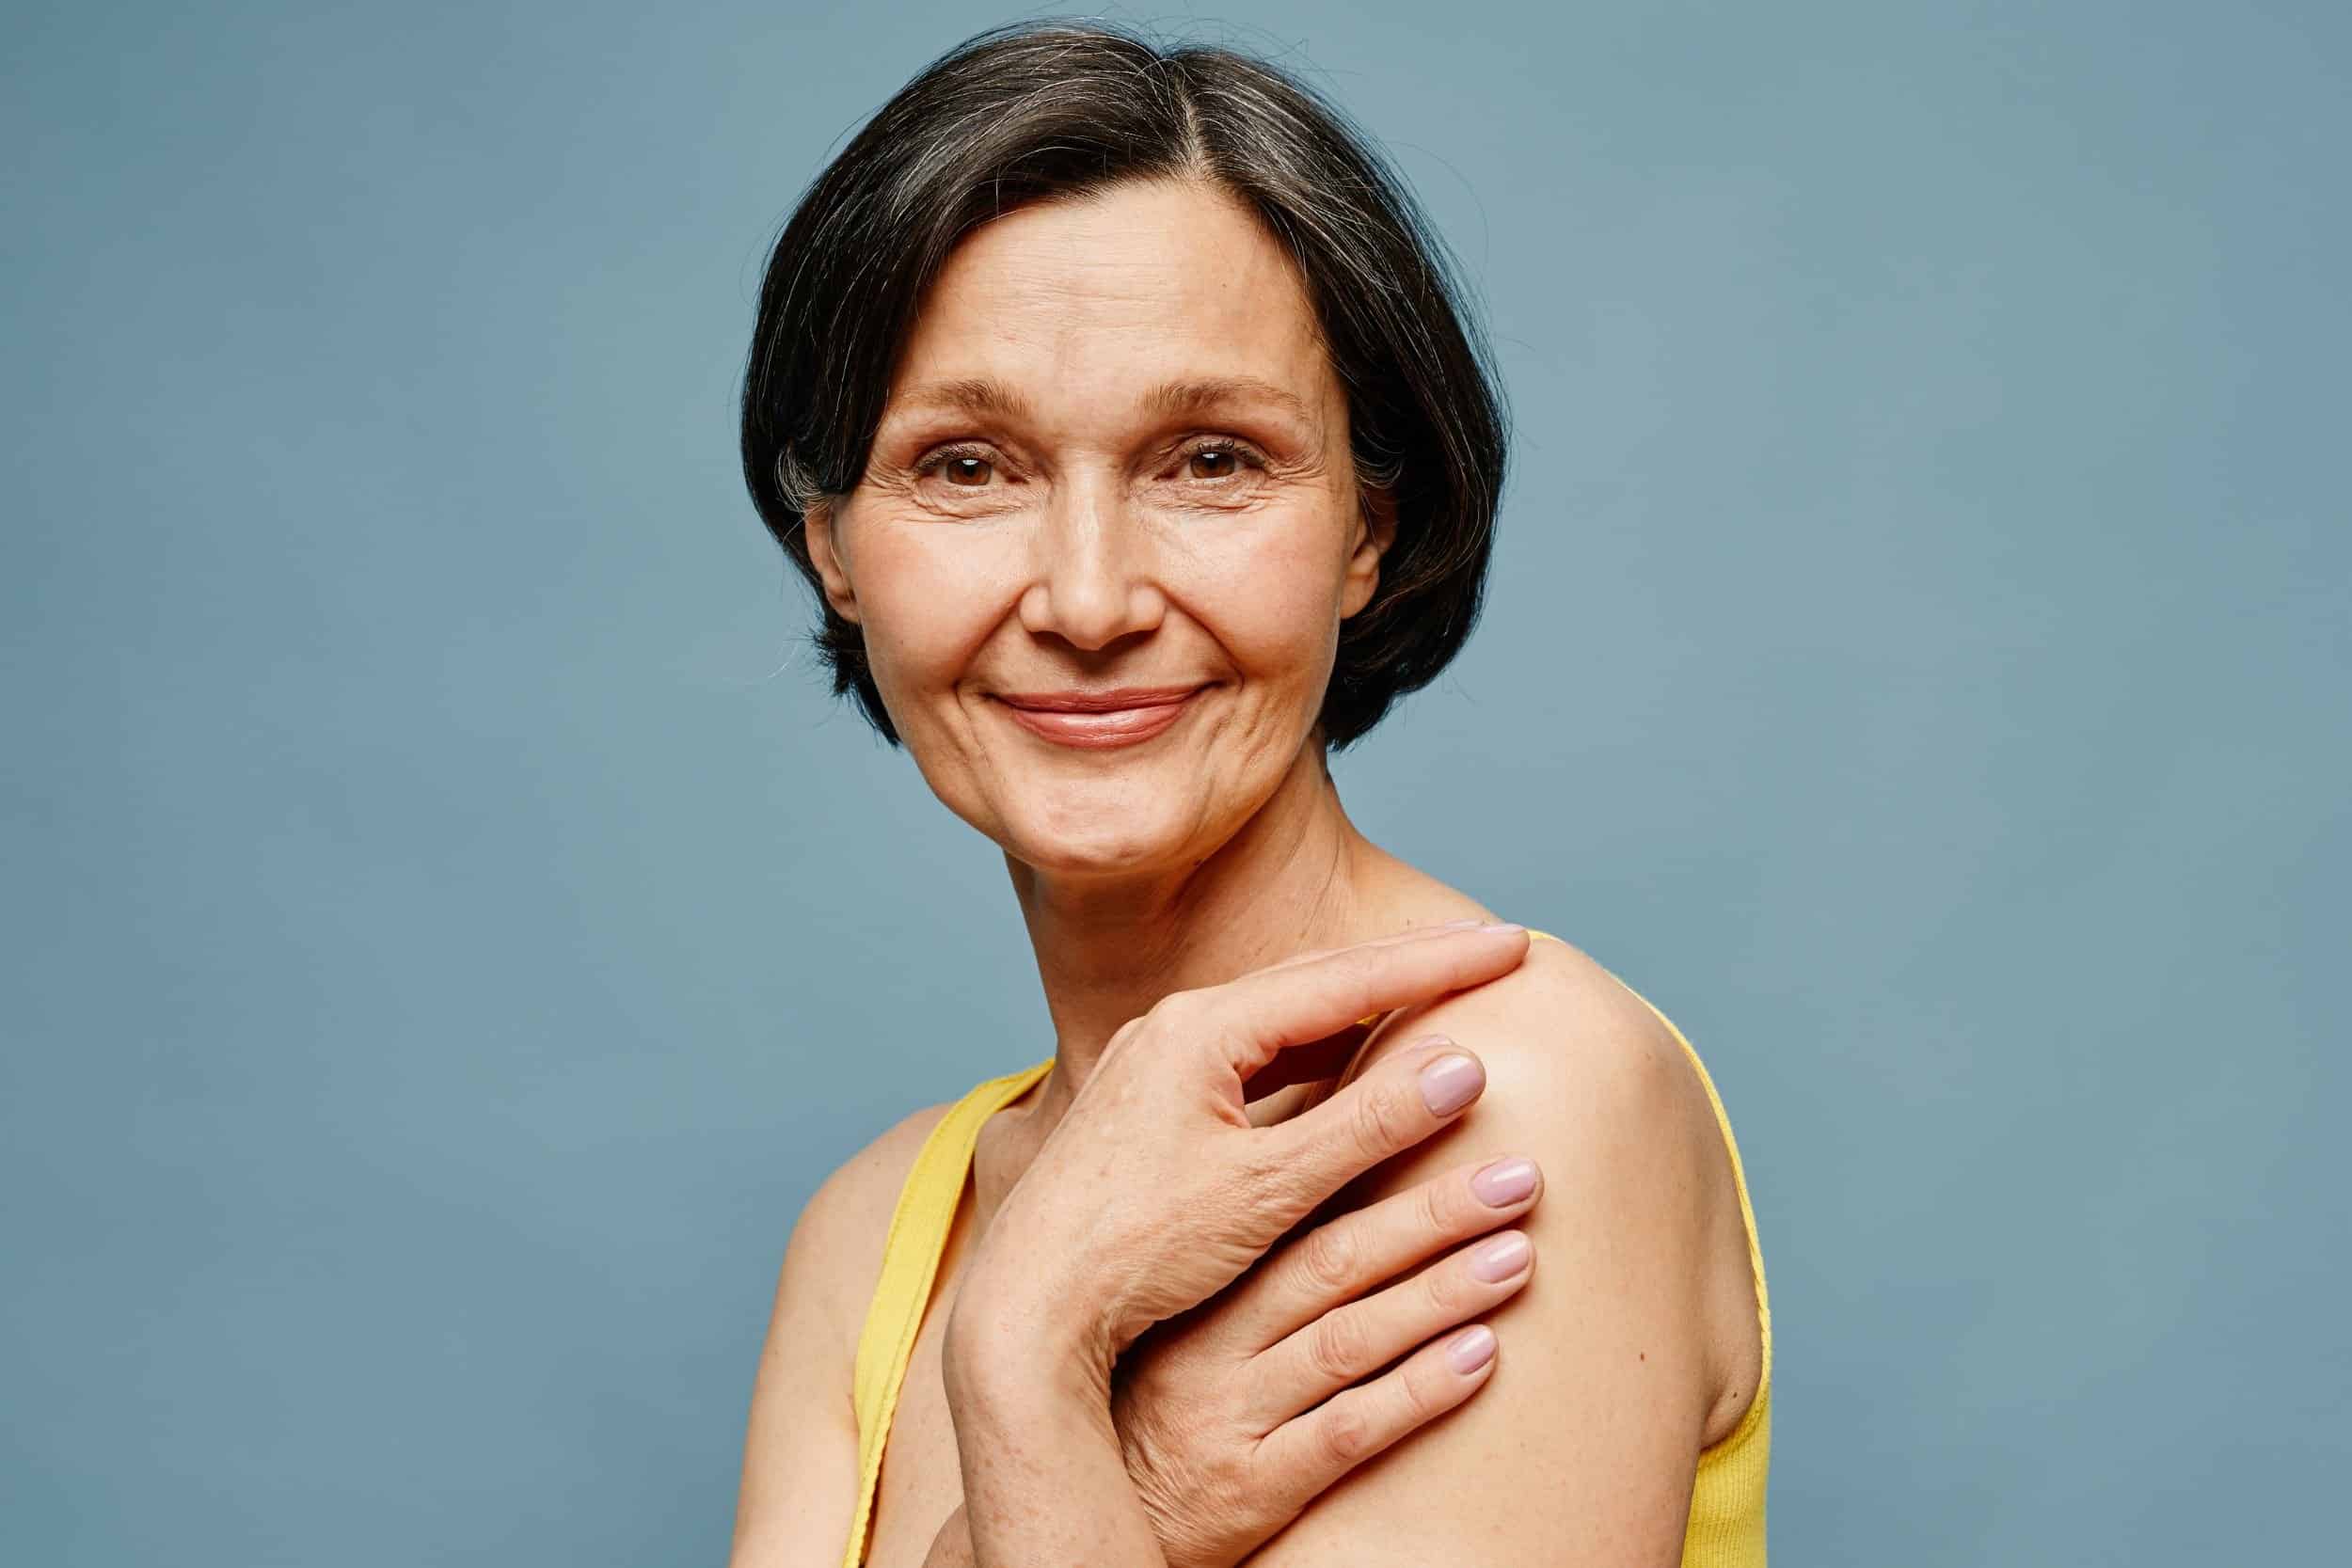 woman in her 50s smiling beautifully wearing a yellow top